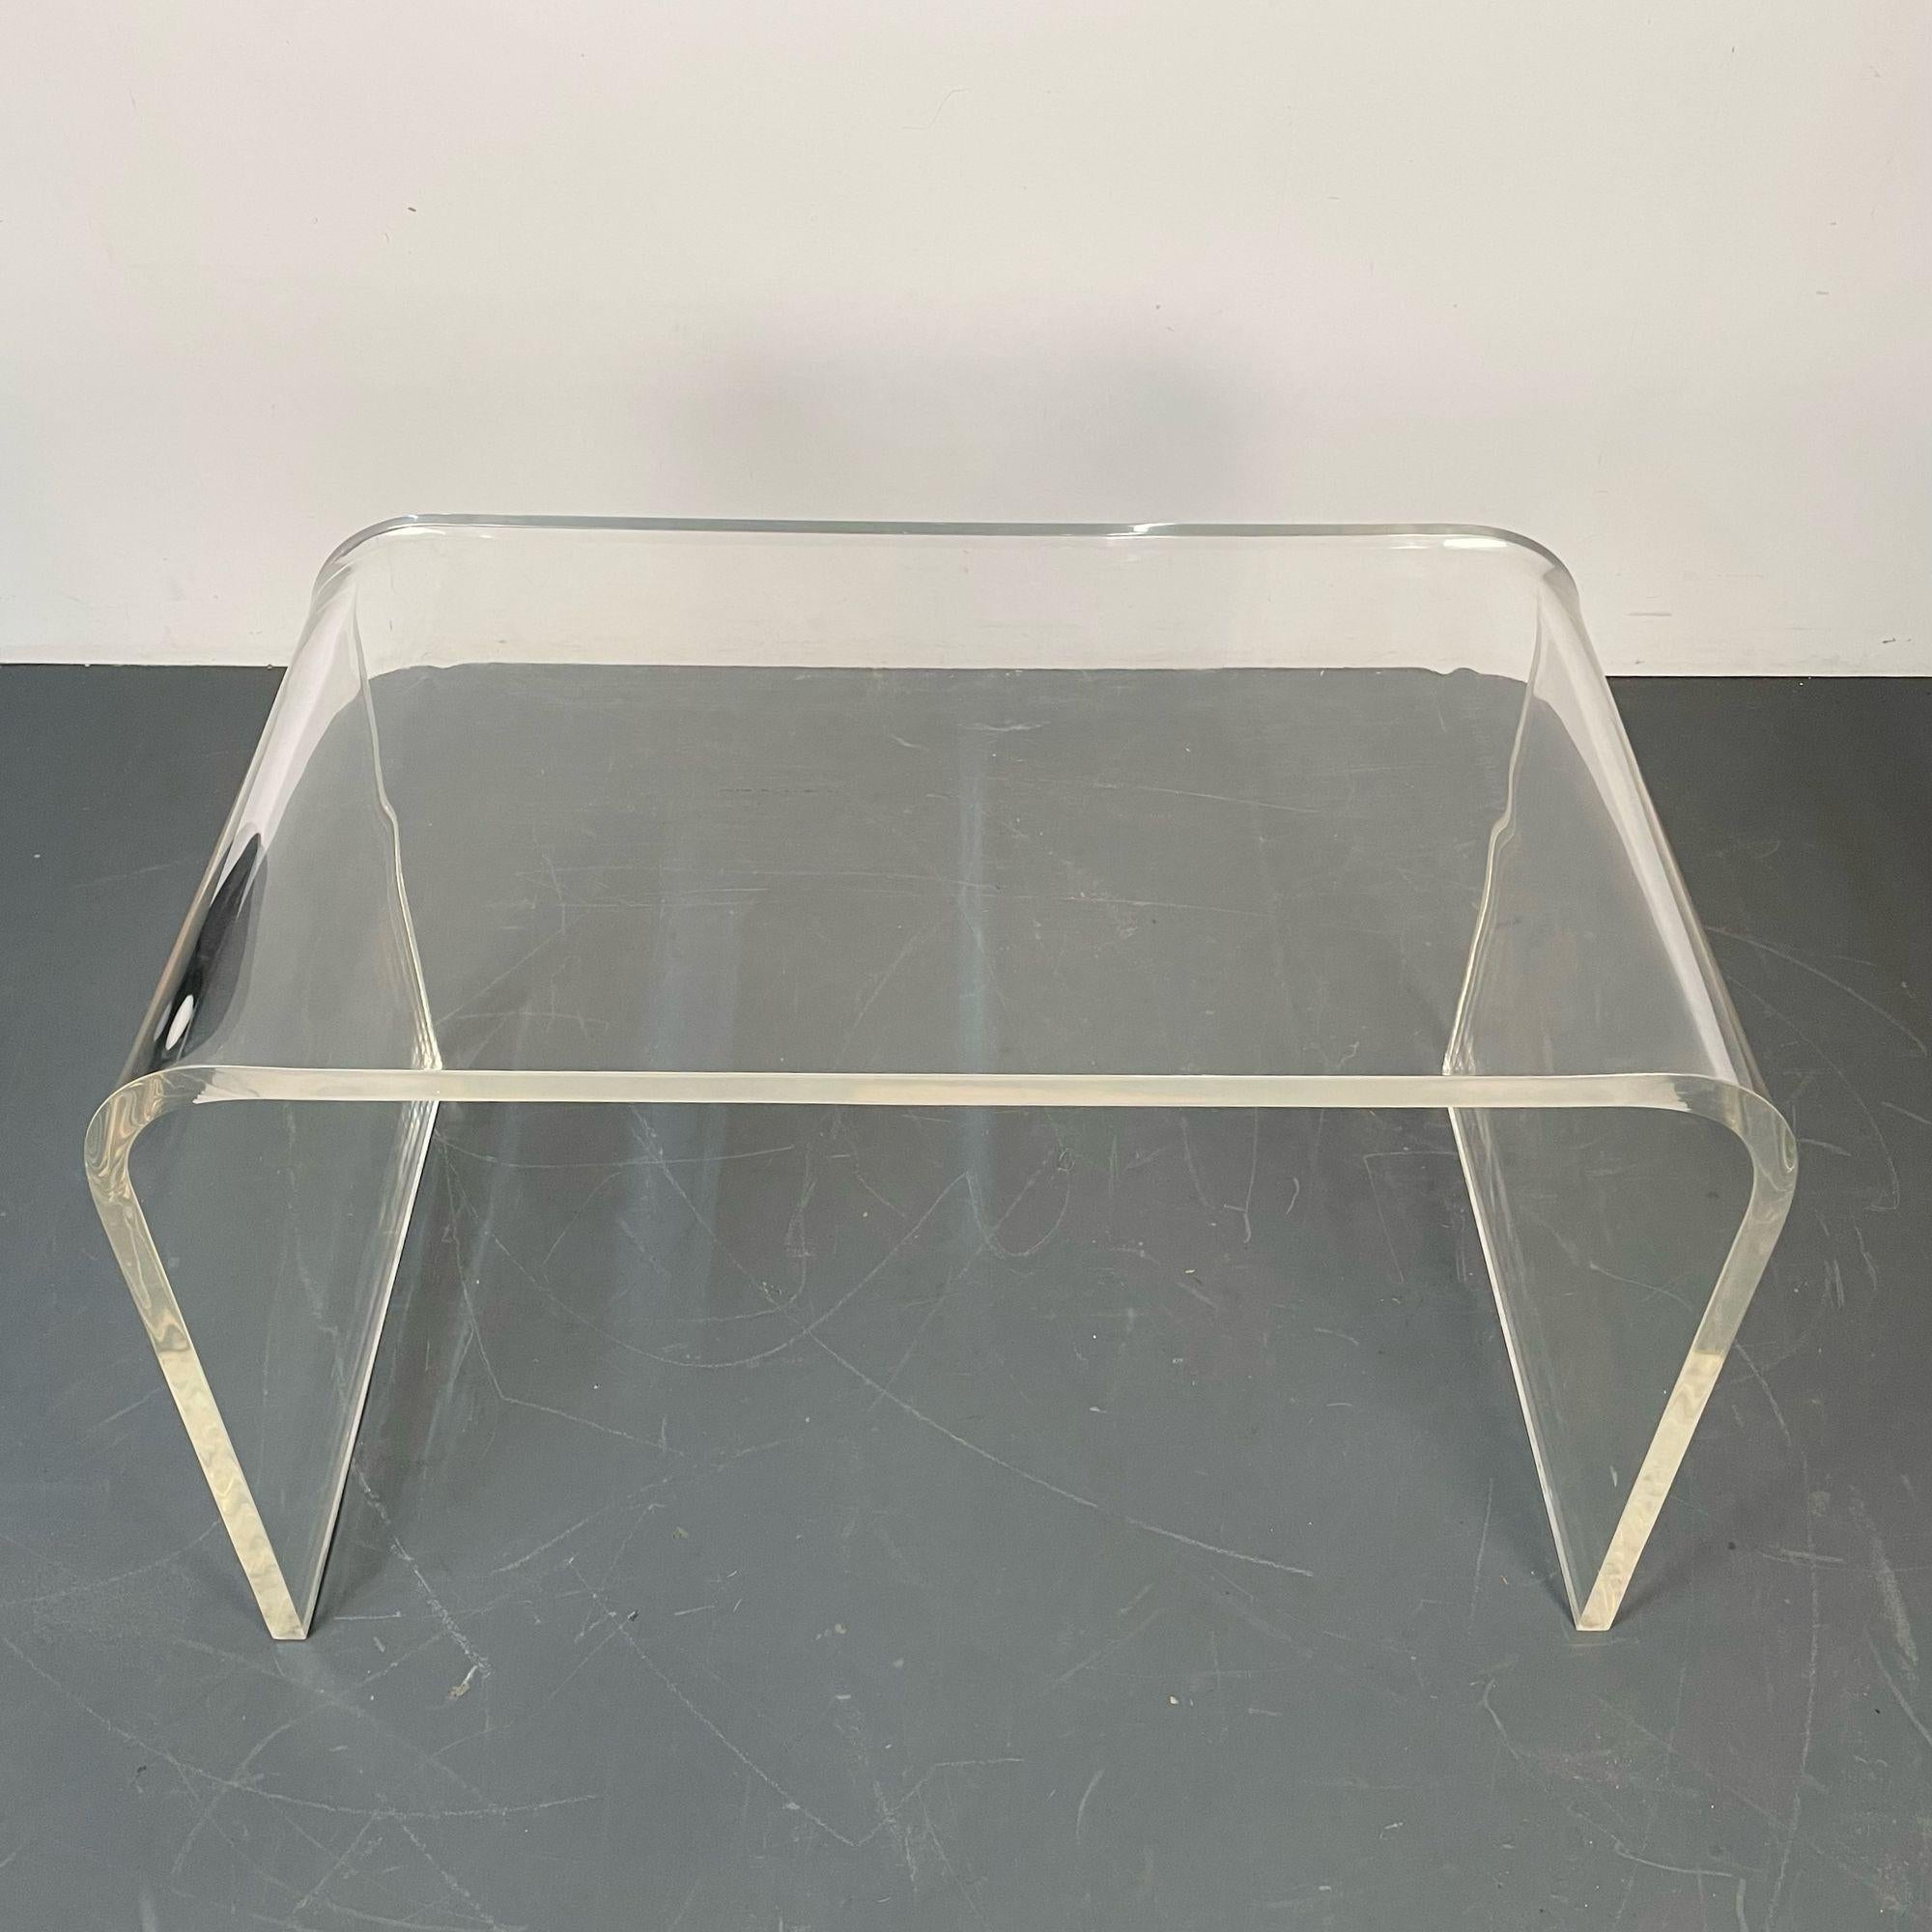 20th Century Mid-Century Modern Lucite Waterfall Console / Writing Table or Desk